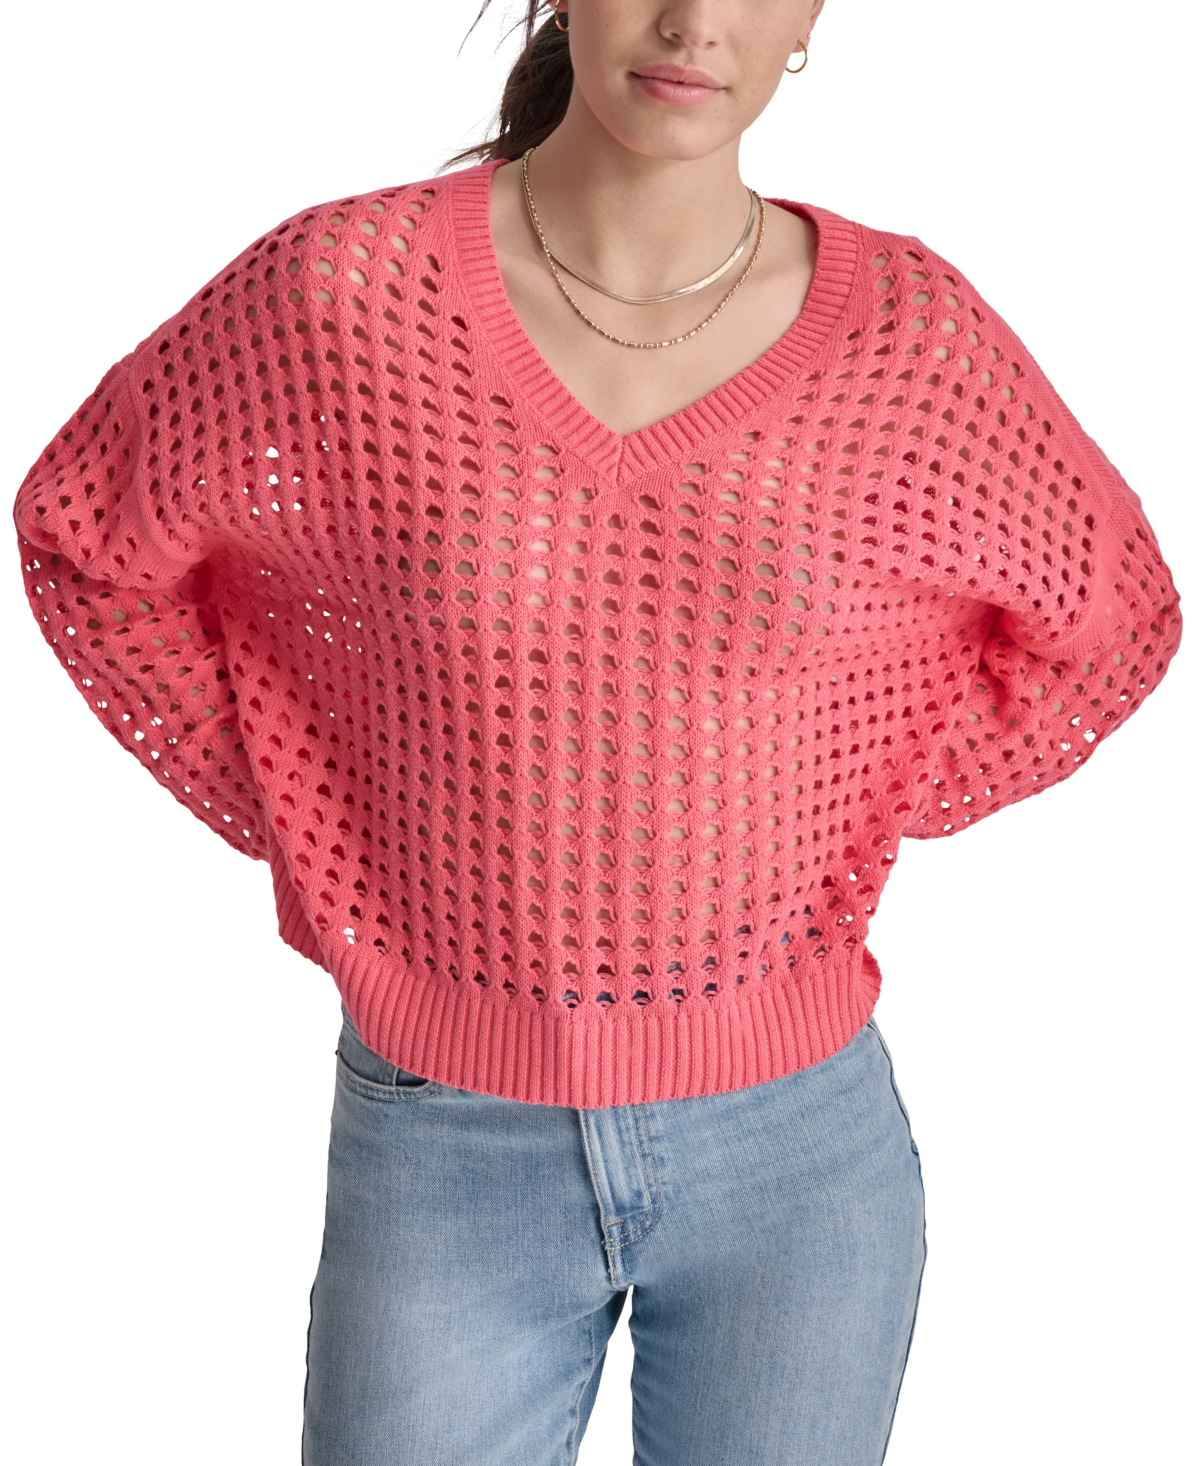 Dkny Jeans Women's V-neck Open-stitch Cotton Sweater In Beach Coral